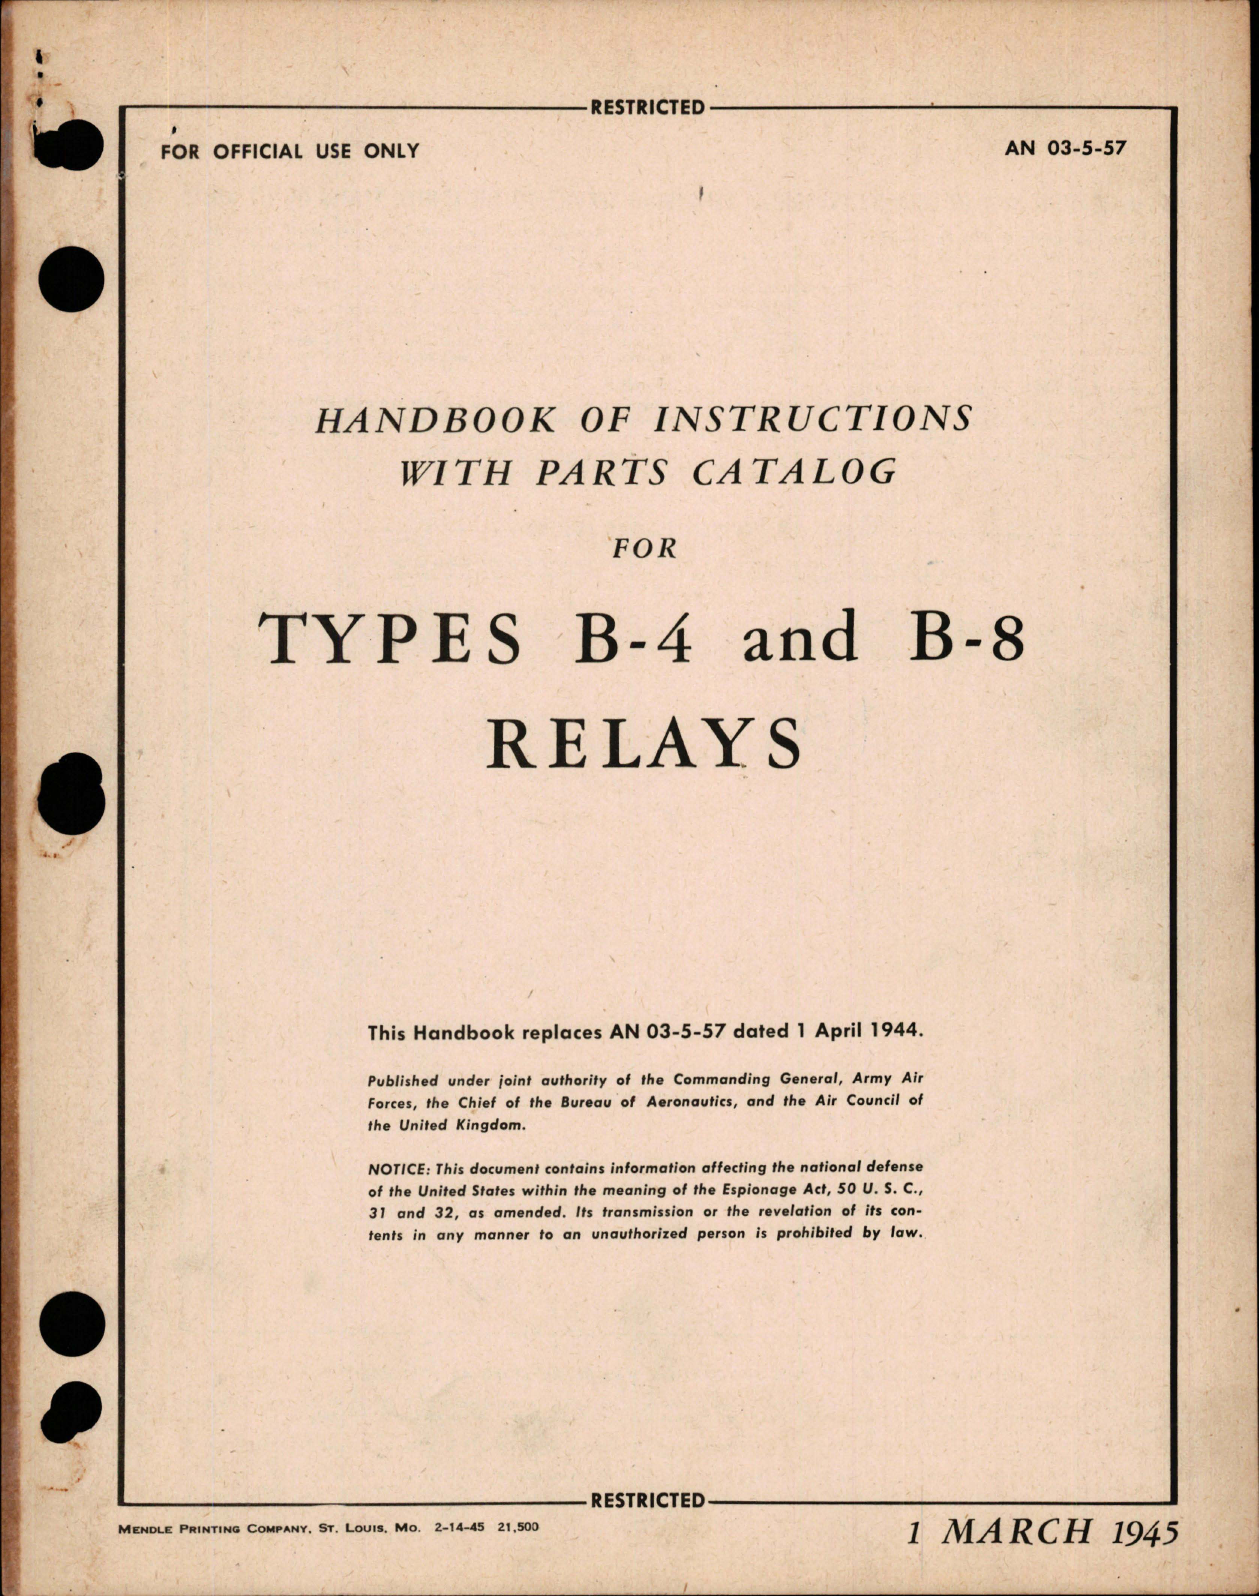 Sample page 1 from AirCorps Library document: Instructions with Parts Catalog for Relays - Types B-4 and B-8 